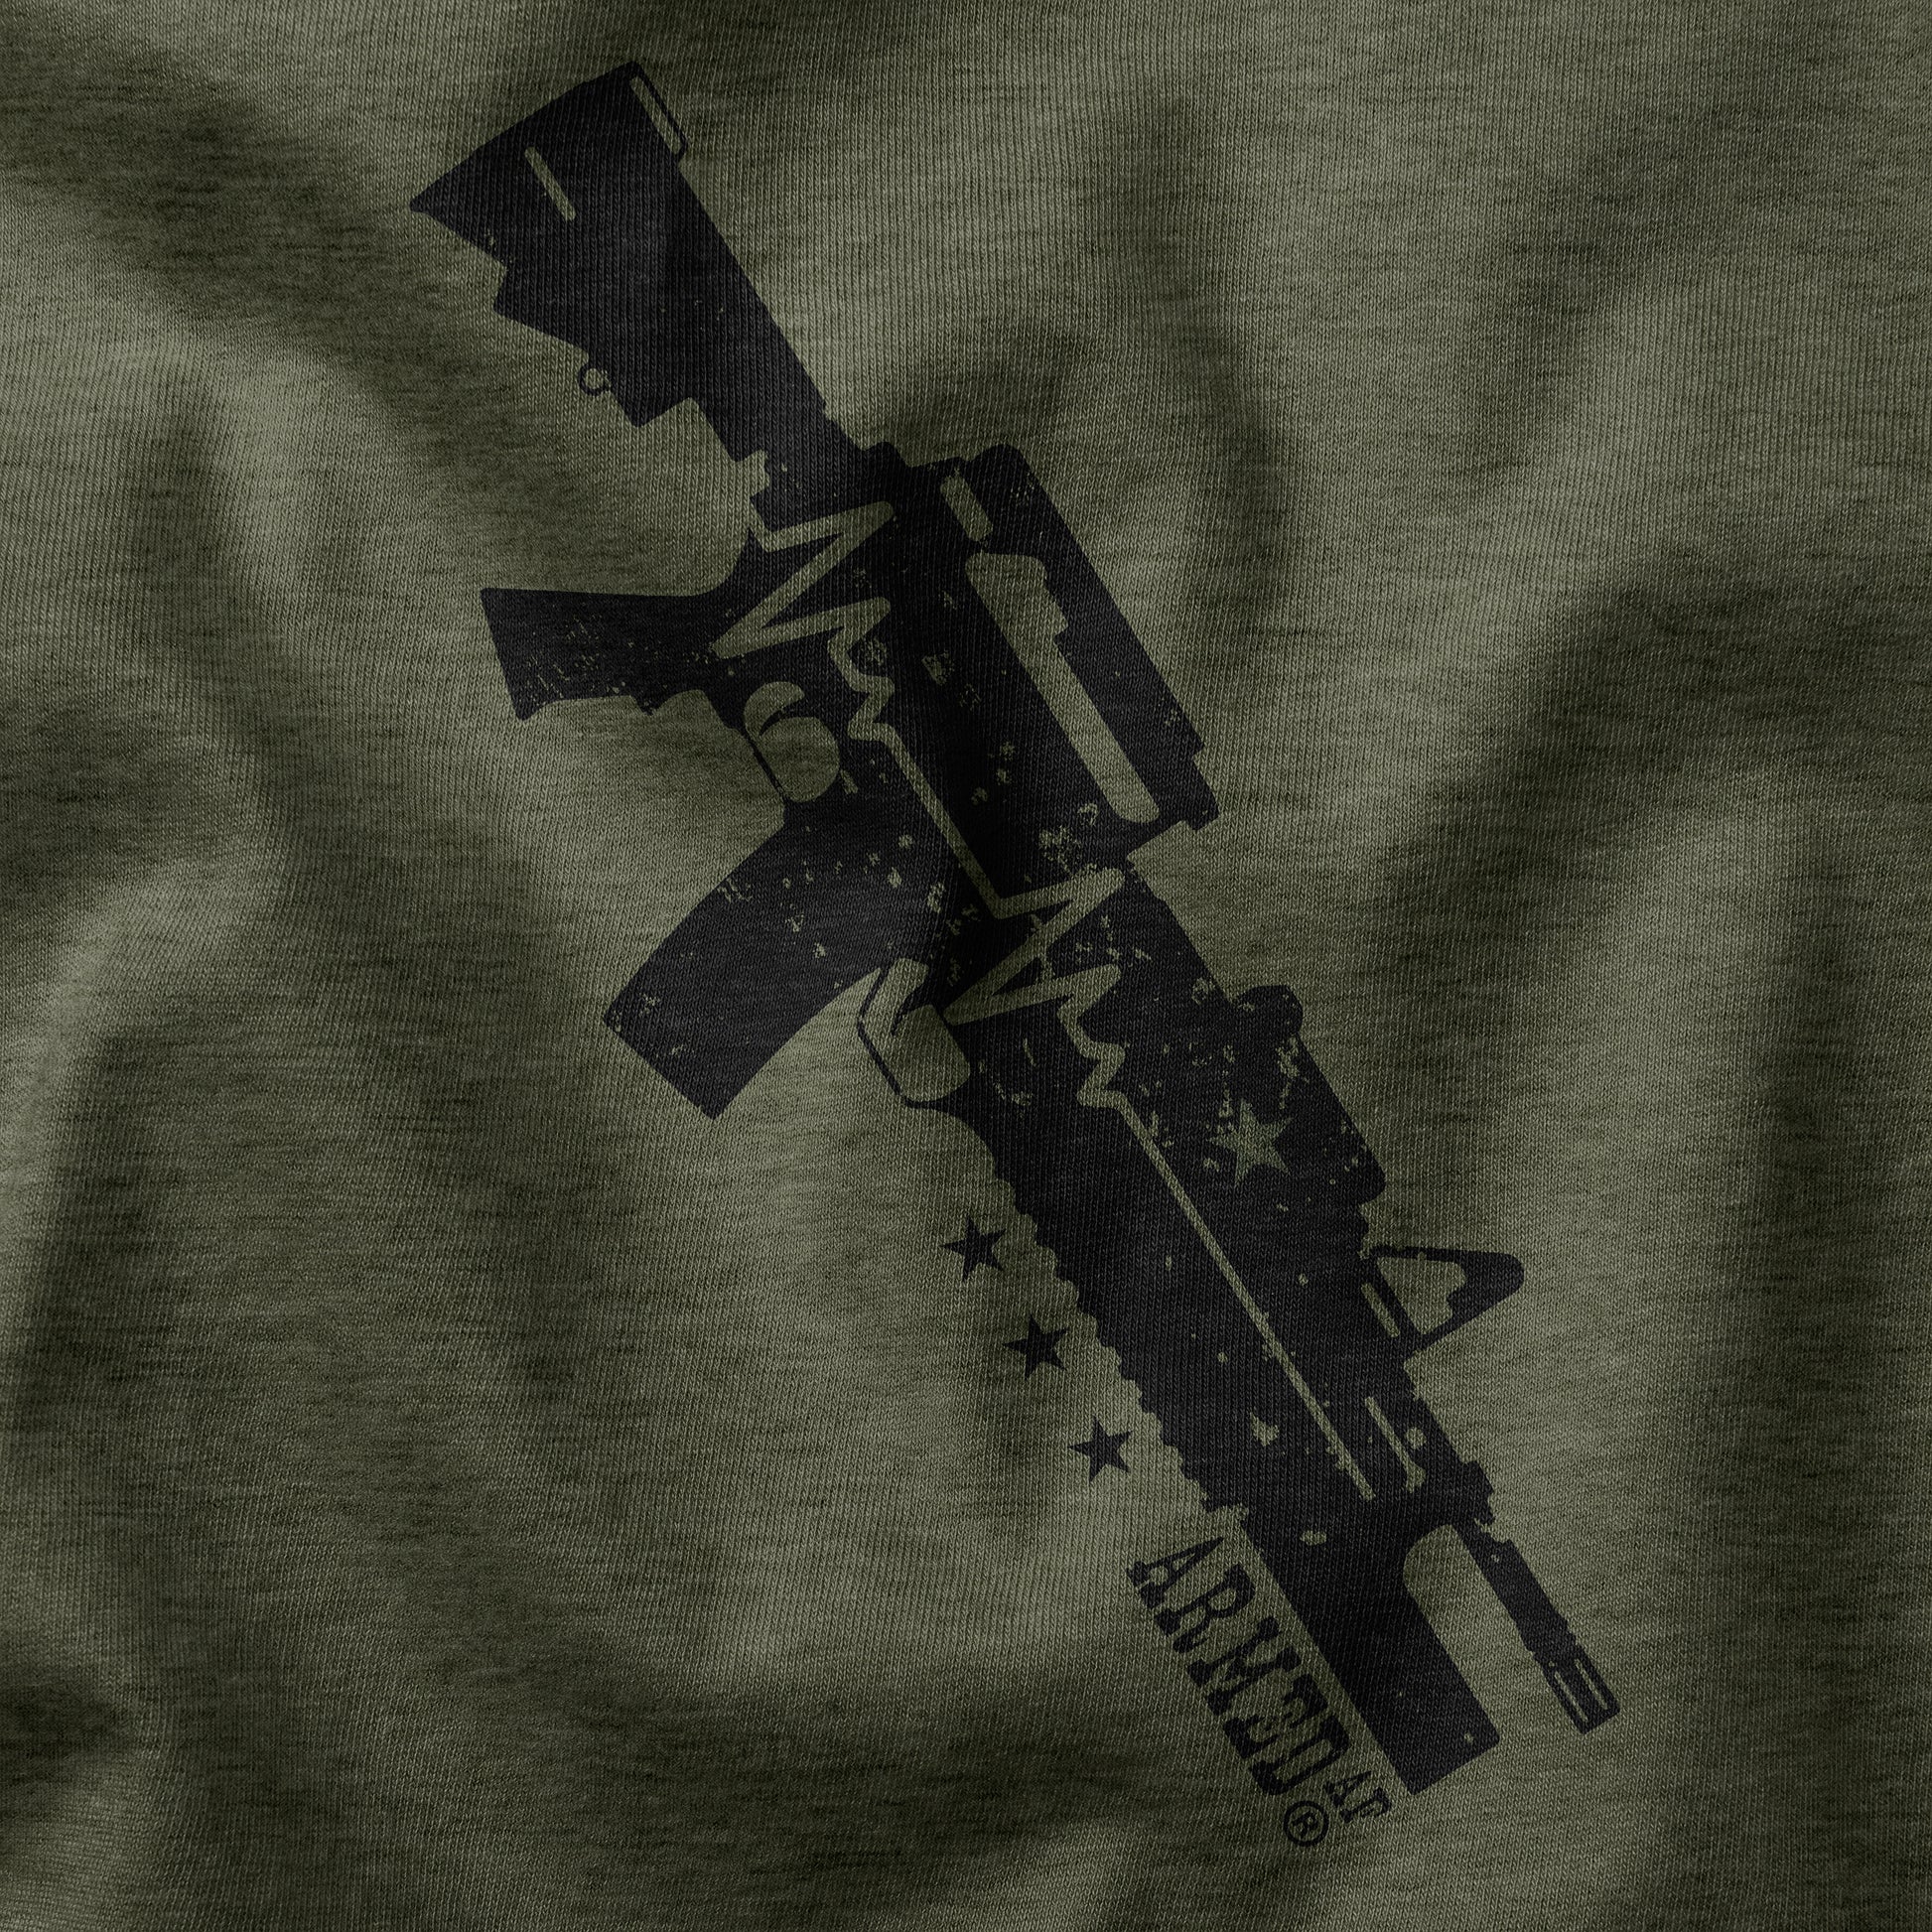 Closeup of heartbeat AR15 rifle tee shirt in olive drab